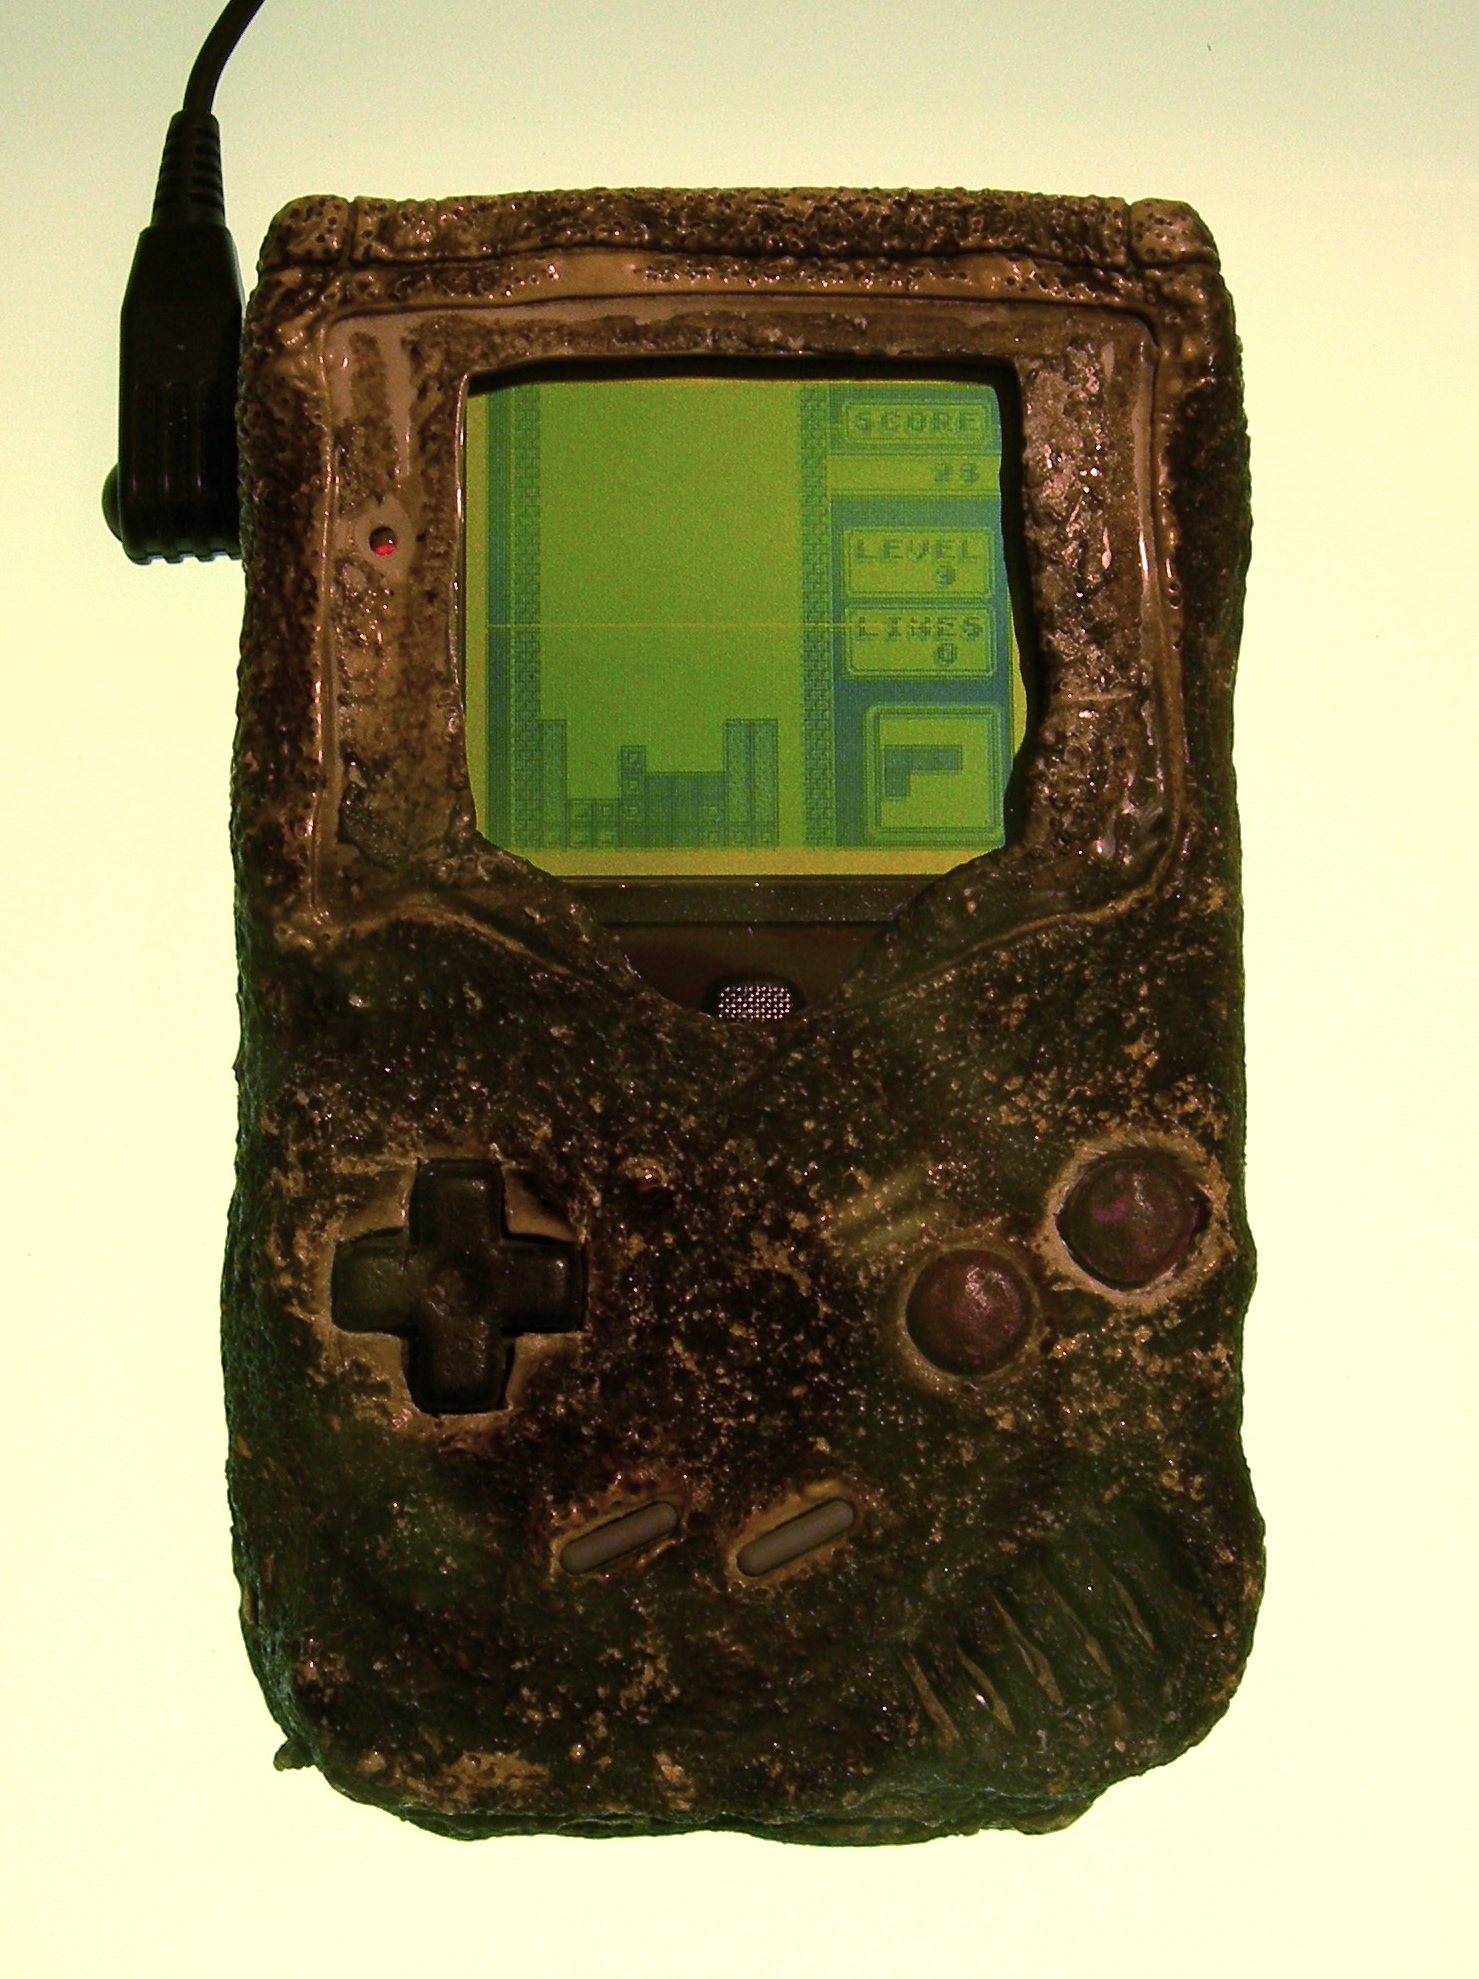 A Game Boy damaged in the gulf war and still capable of playing Tetris